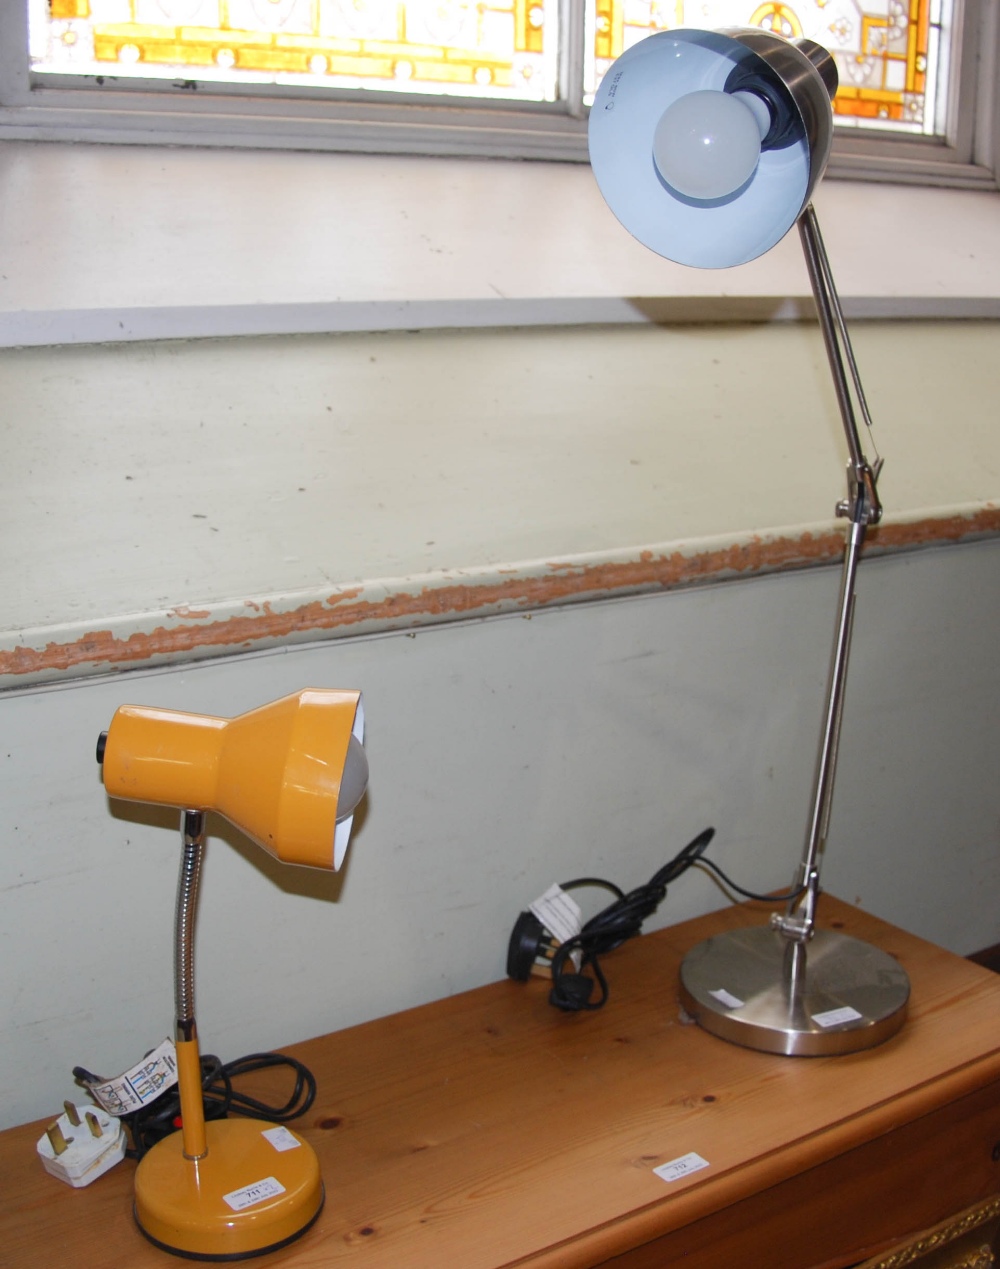 TWO DESK LAMPS